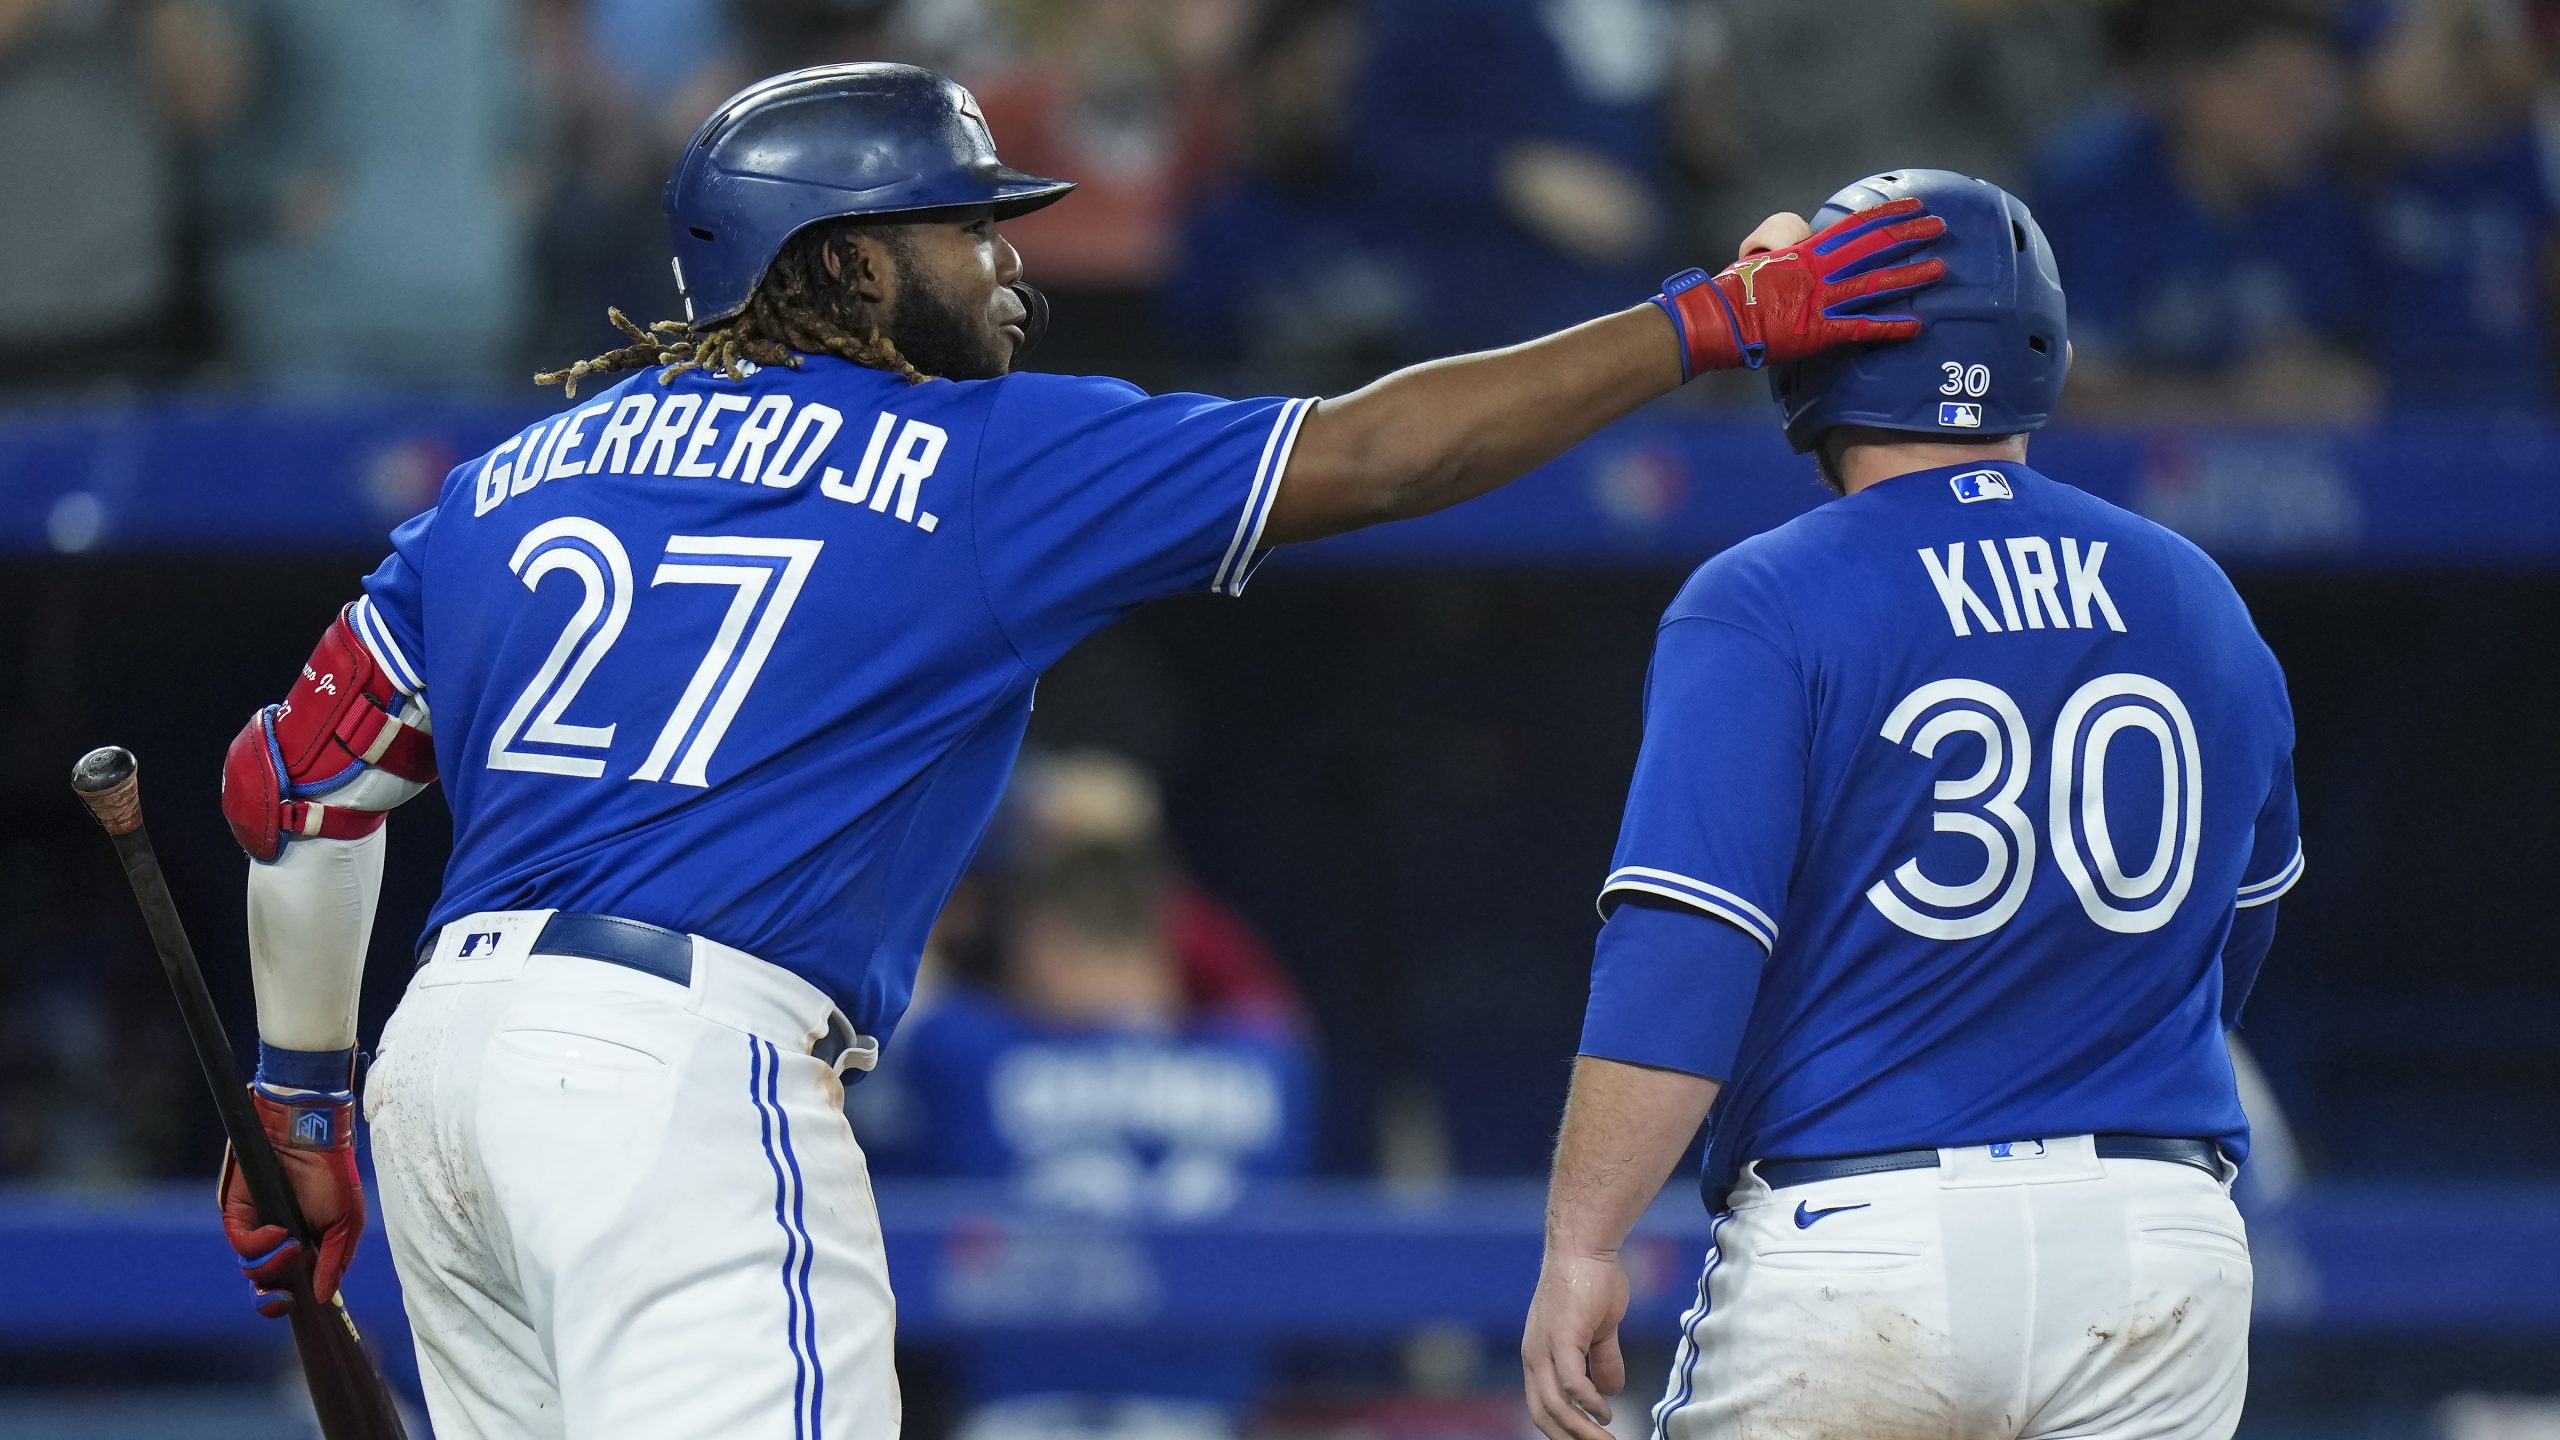 World Baseball Classic: Kirk, Guerrero Jr. out as rosters take shape  leading into tournament